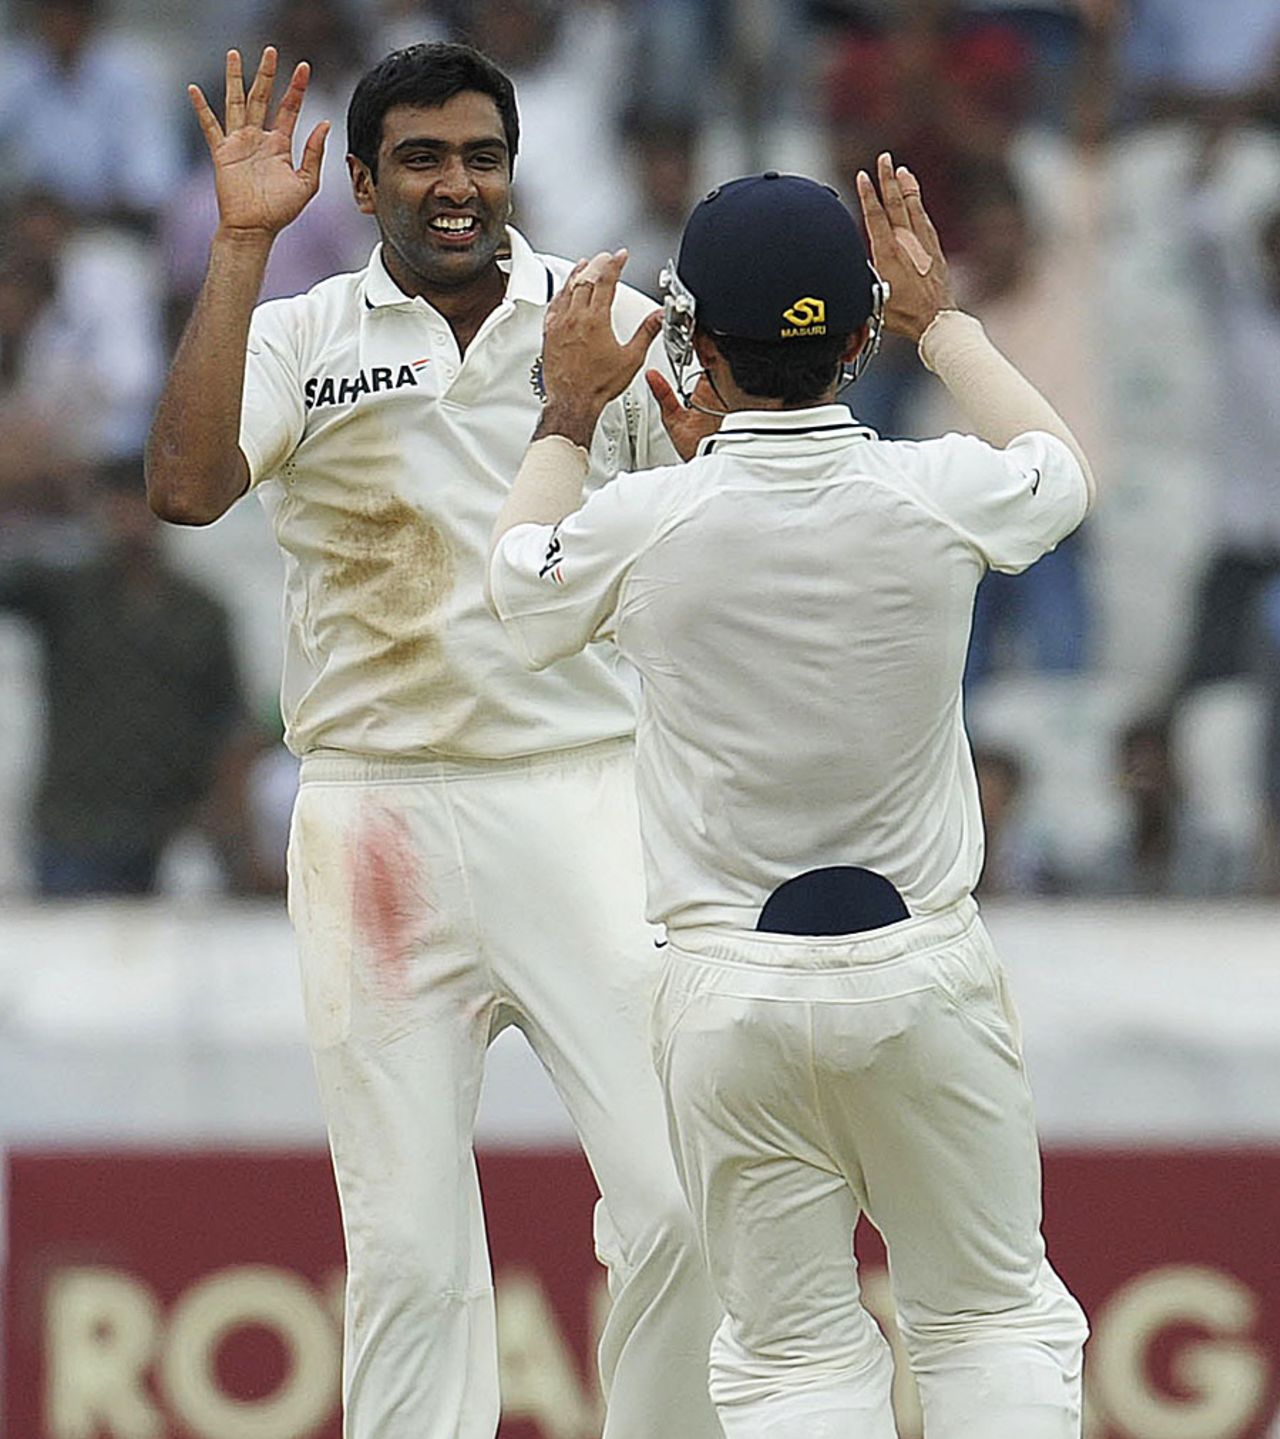 R Ashwin took back-to-back six-wicket hauls, India v New Zealand, 1st Test, Hyderabad, 4th day, August 26, 2012